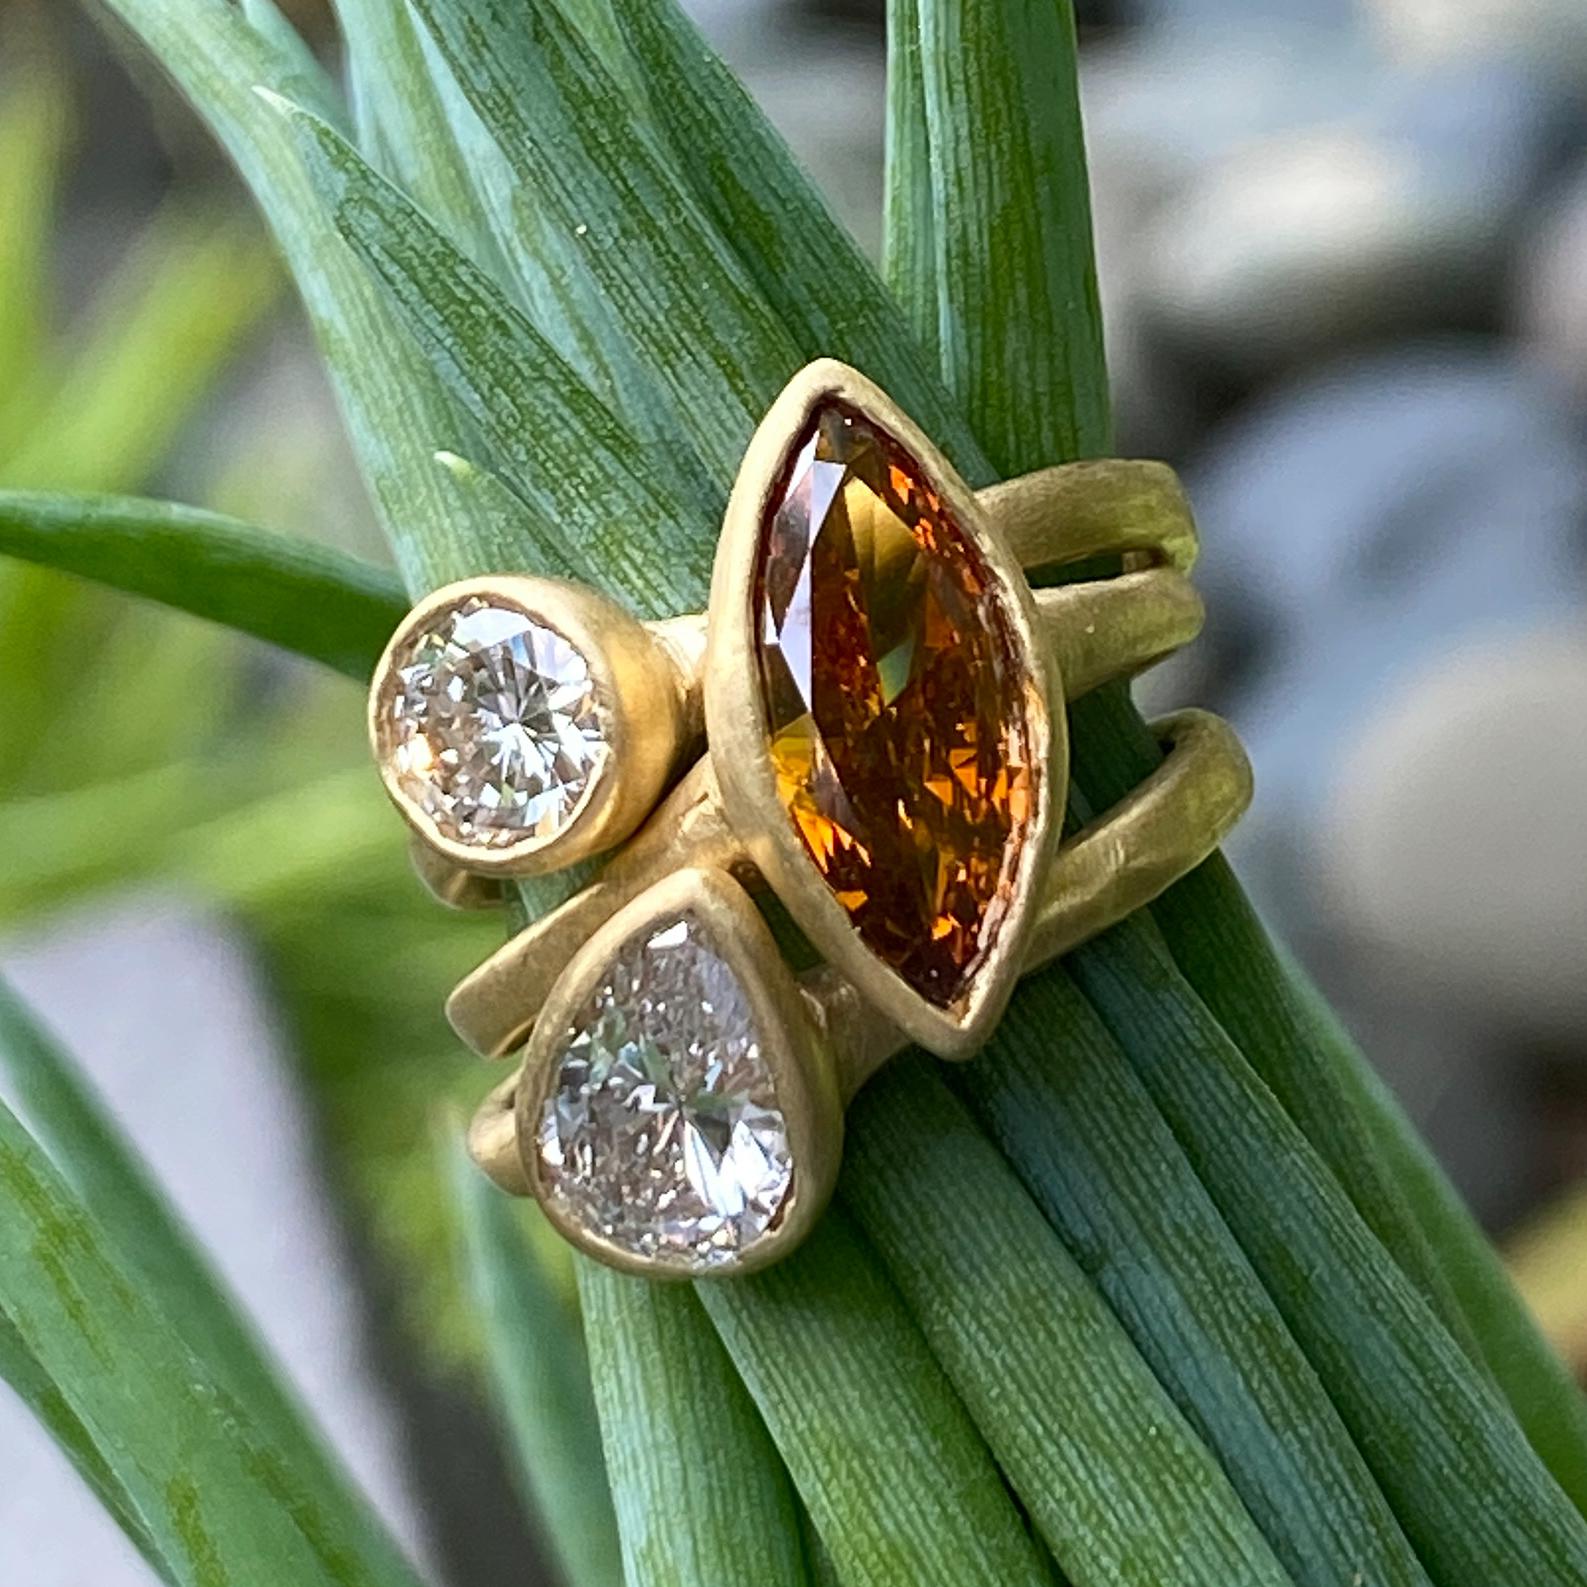 Versatile and fun to wear, individually or stacked together, this vivid set of earth-mined diamond solitaires by Eytan Brandes features three very different stones.  

The big marquise is set at a jaunty angle; it has a classic marquise cut but